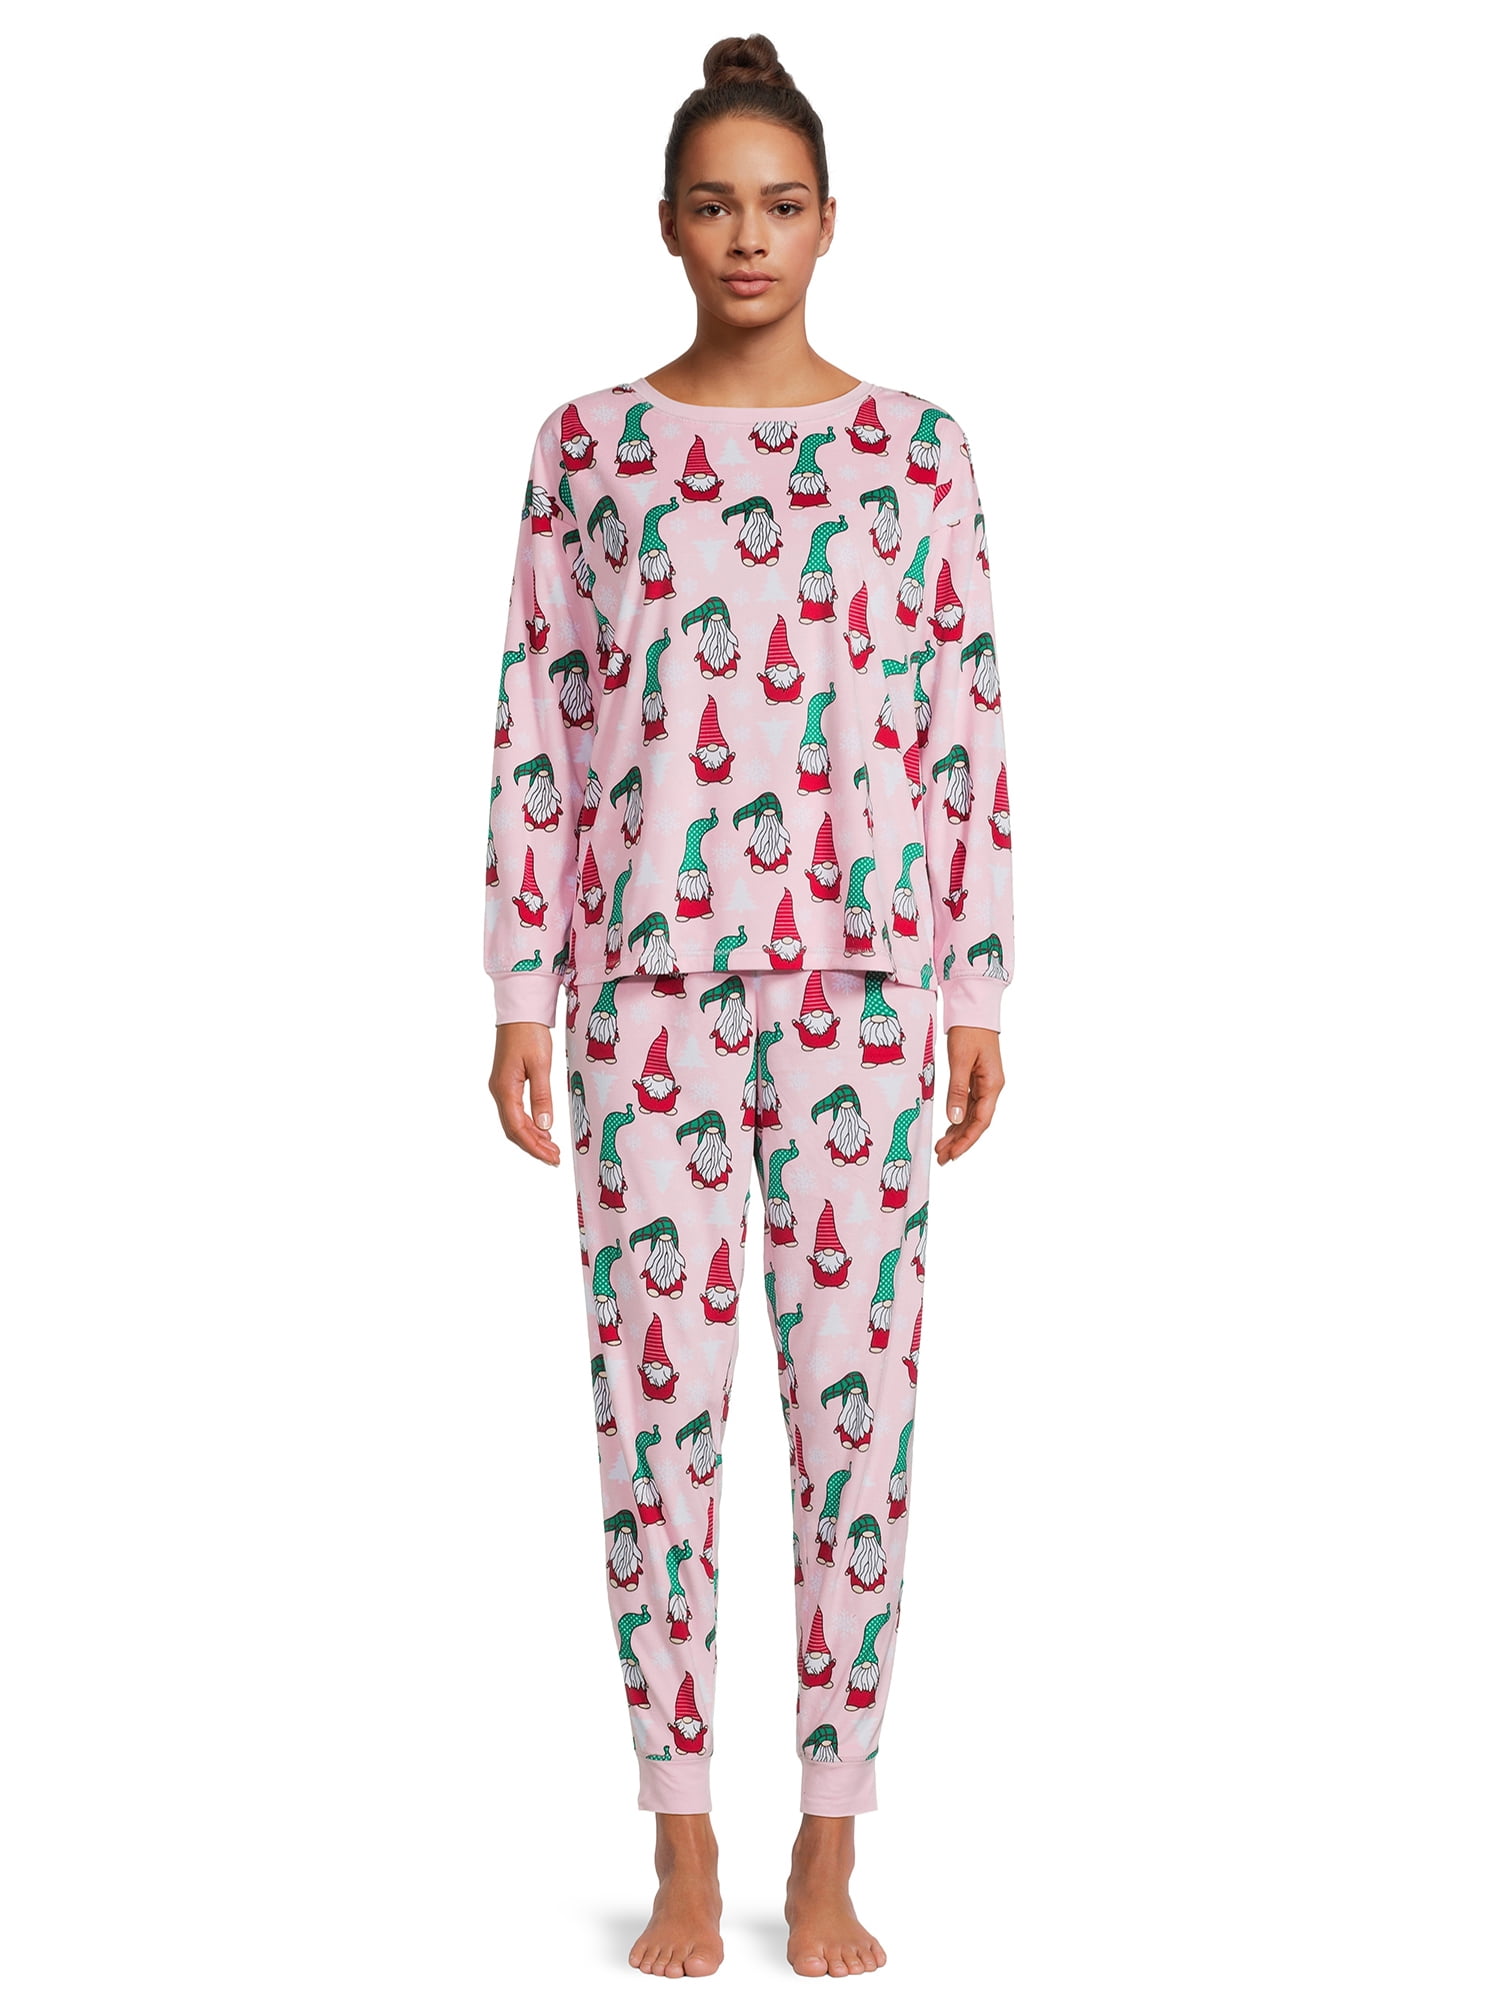 Holiday Time Women's Velour Gnome Print Top and Pants Pajama Set, 2-Piece,  Sizes S-3X